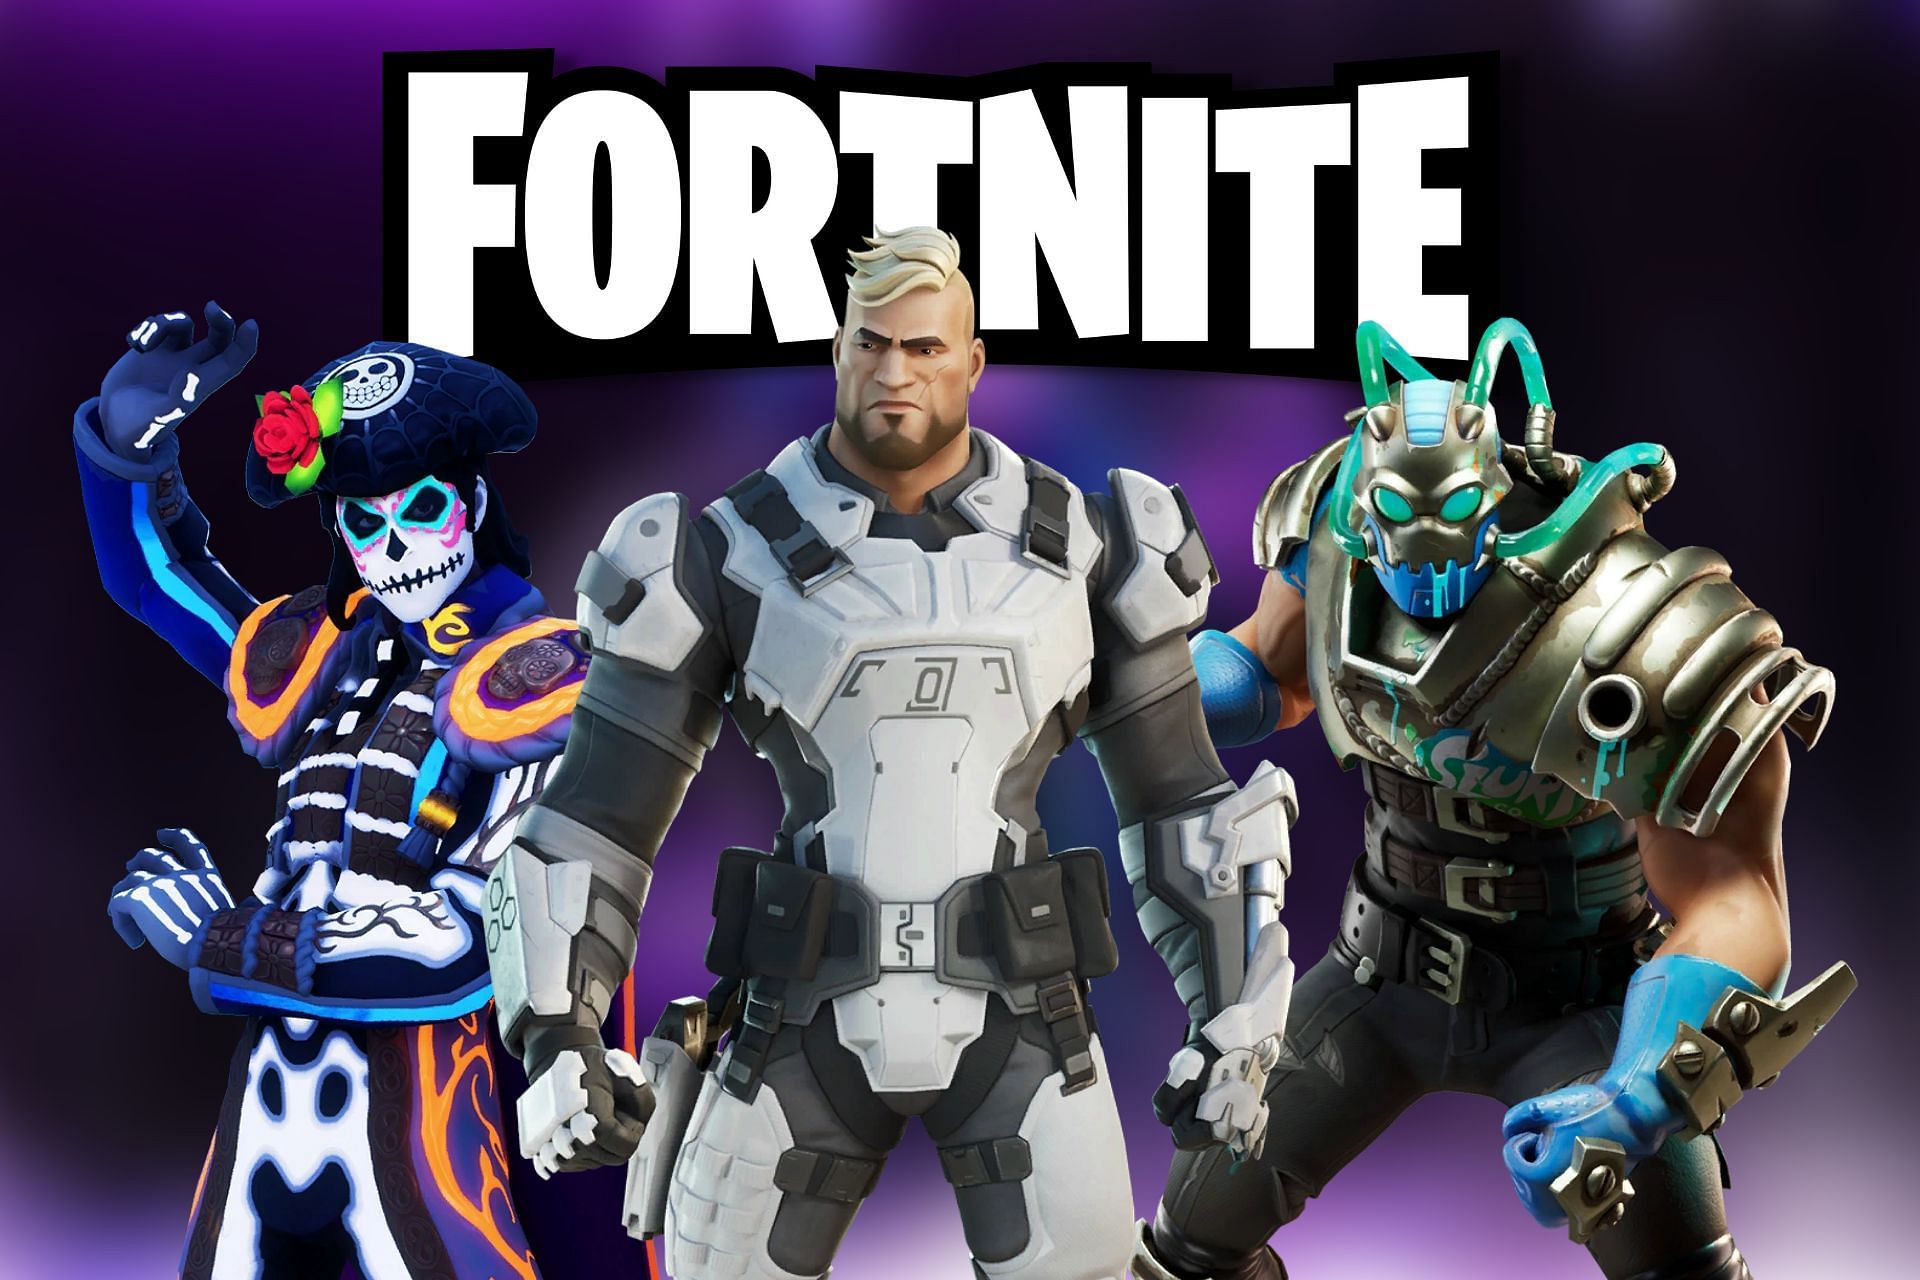 There are plenty pay-to-lose skins in Fortnite (Image via Sportskeeda)